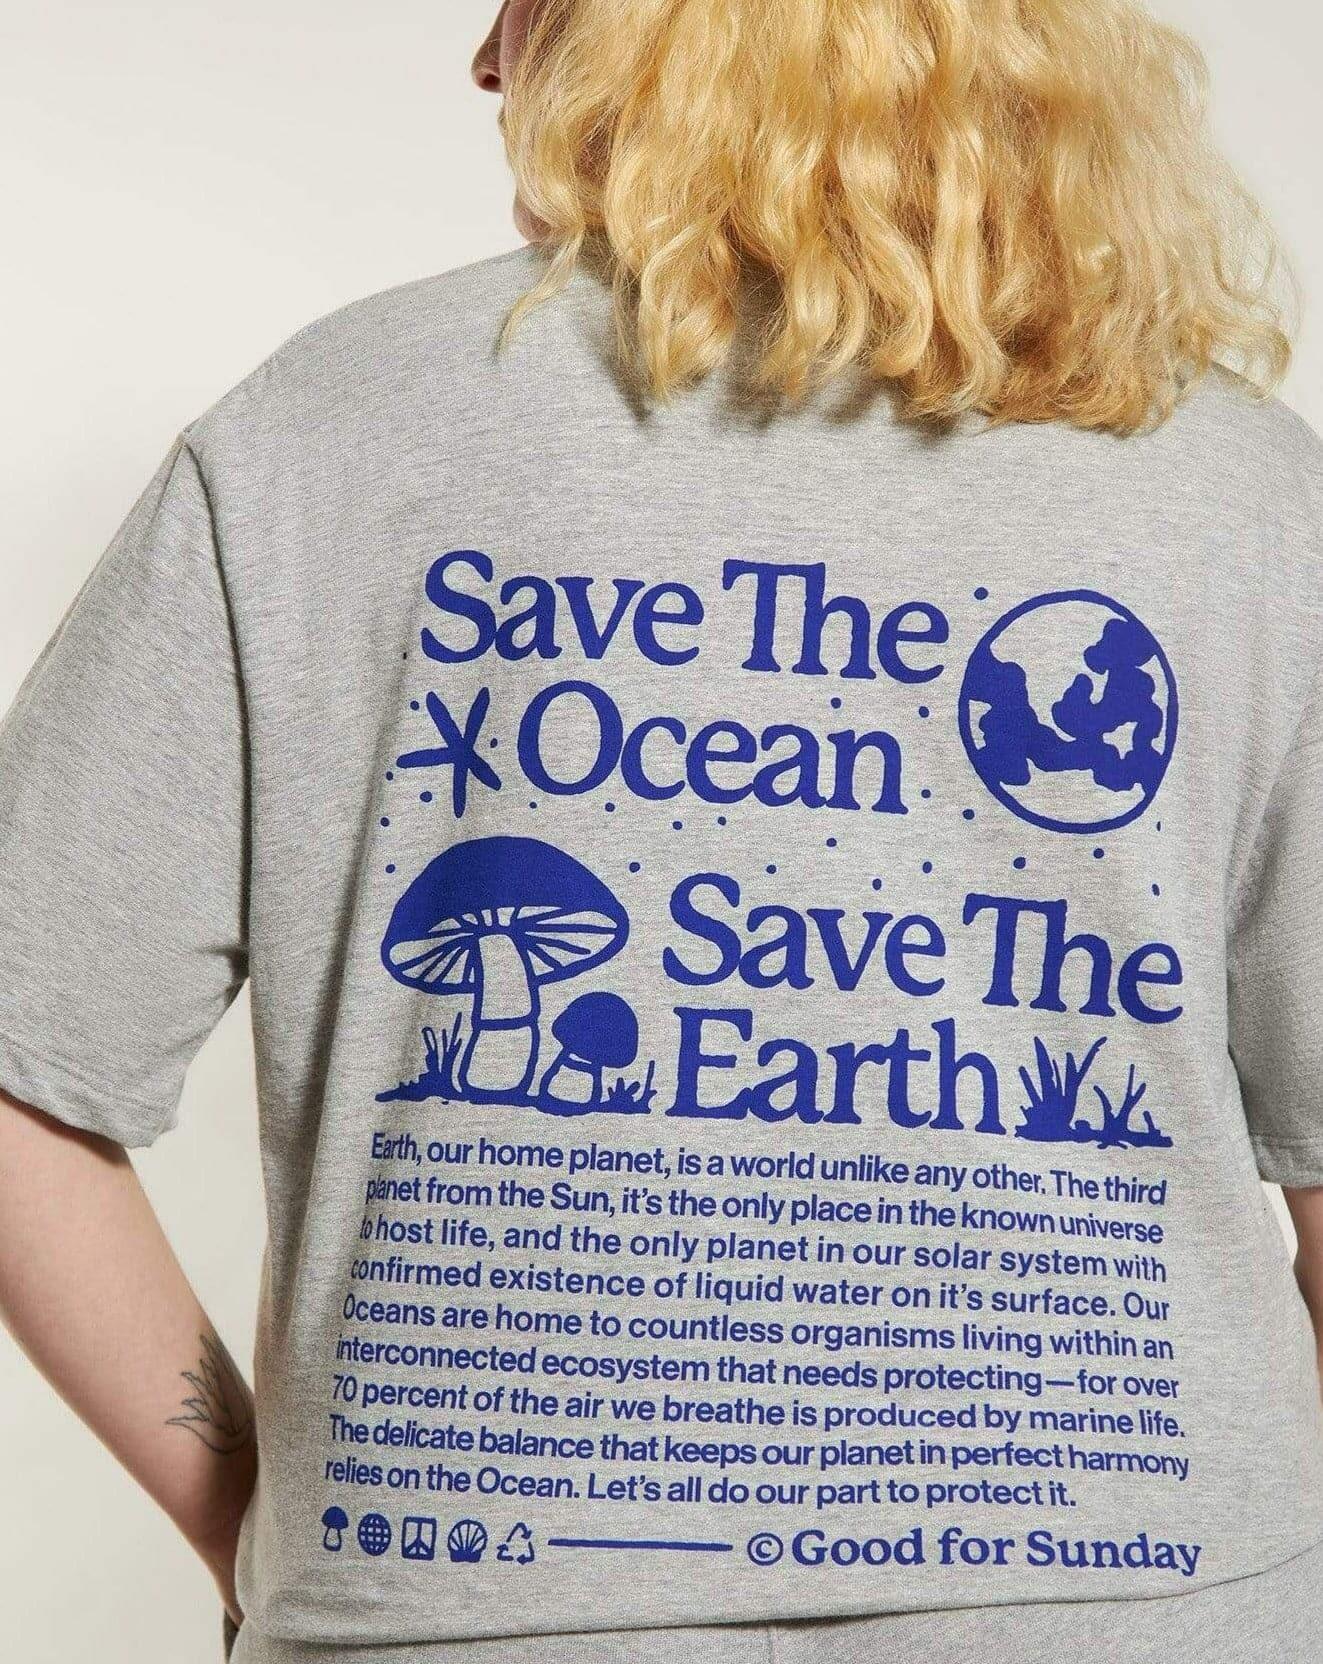 Organic Cotton T Shirt - Save the Ocean by Good for Sunday - OAT & OCHRE | Slow Fashion, Organic, Ethically-Made